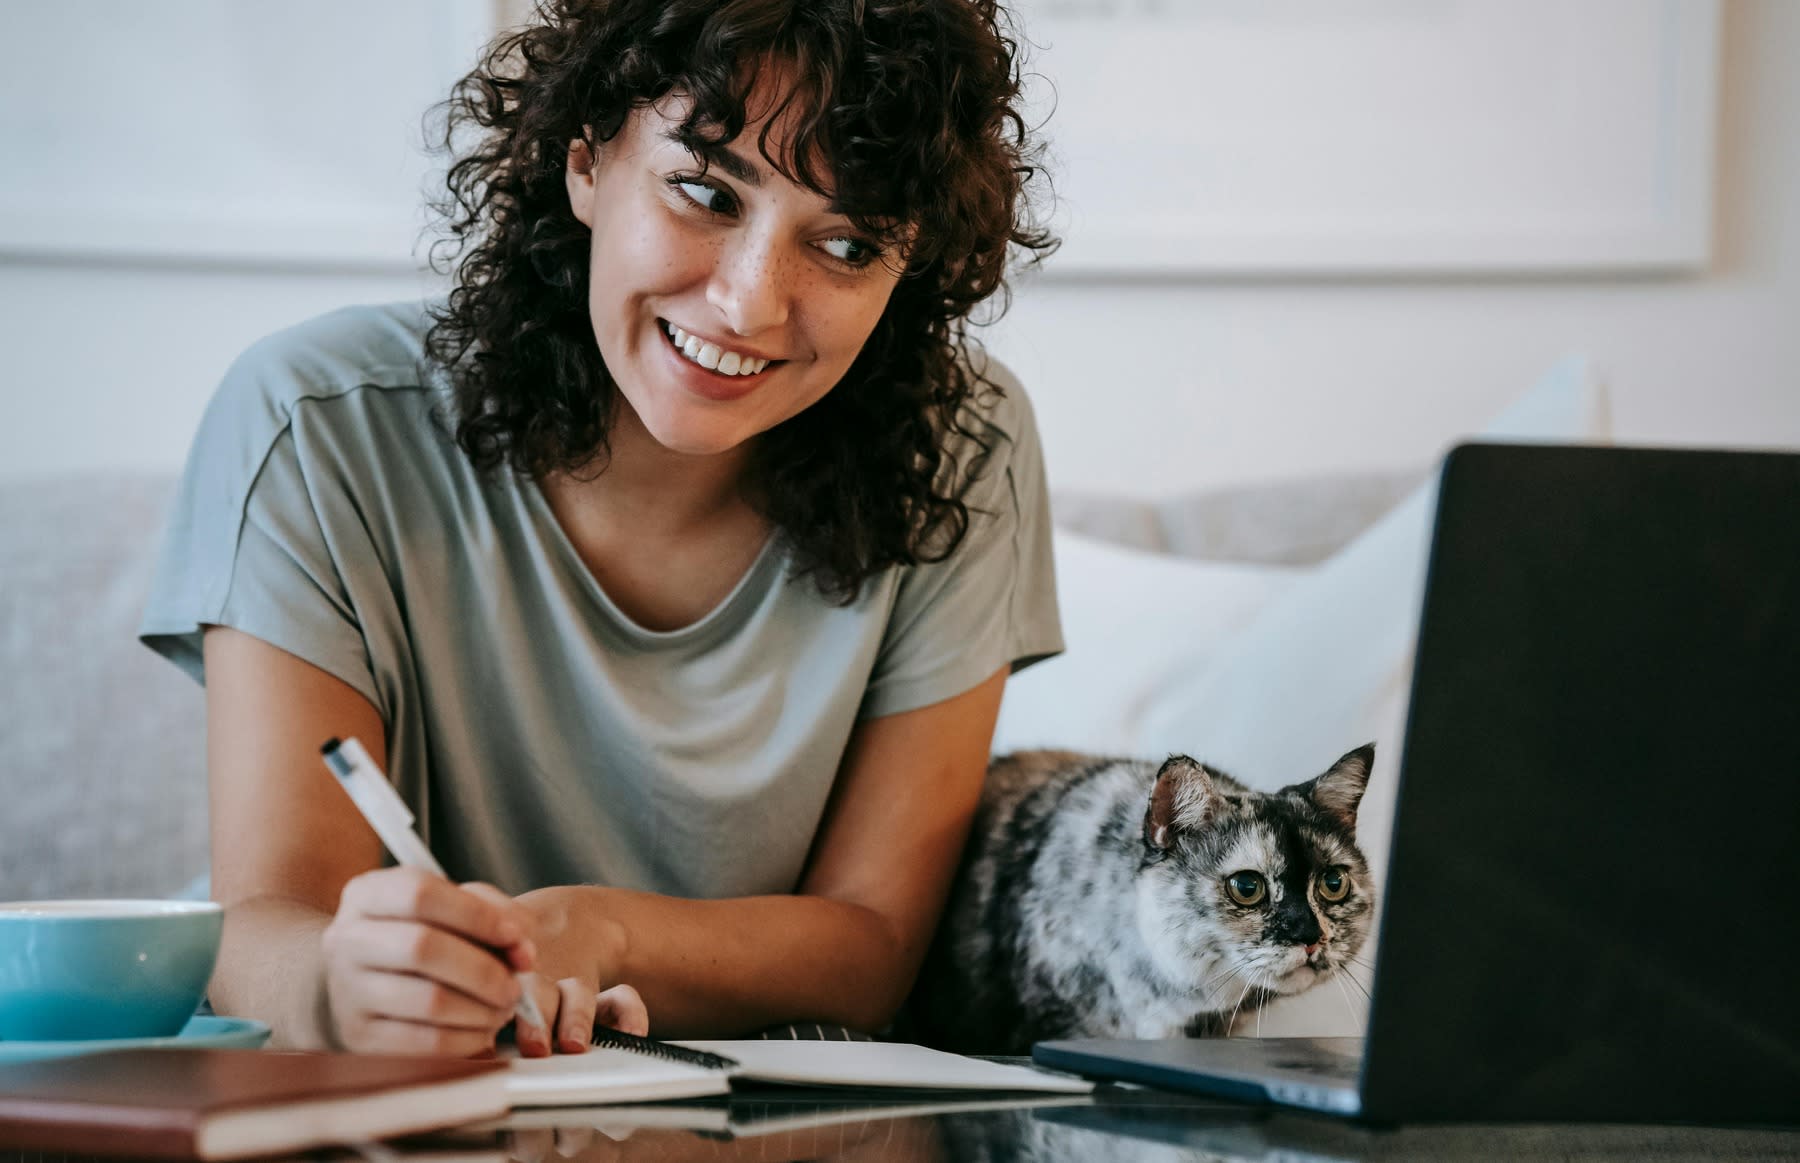 Woman writing notes as she looks on her laptop, with her cat beside her